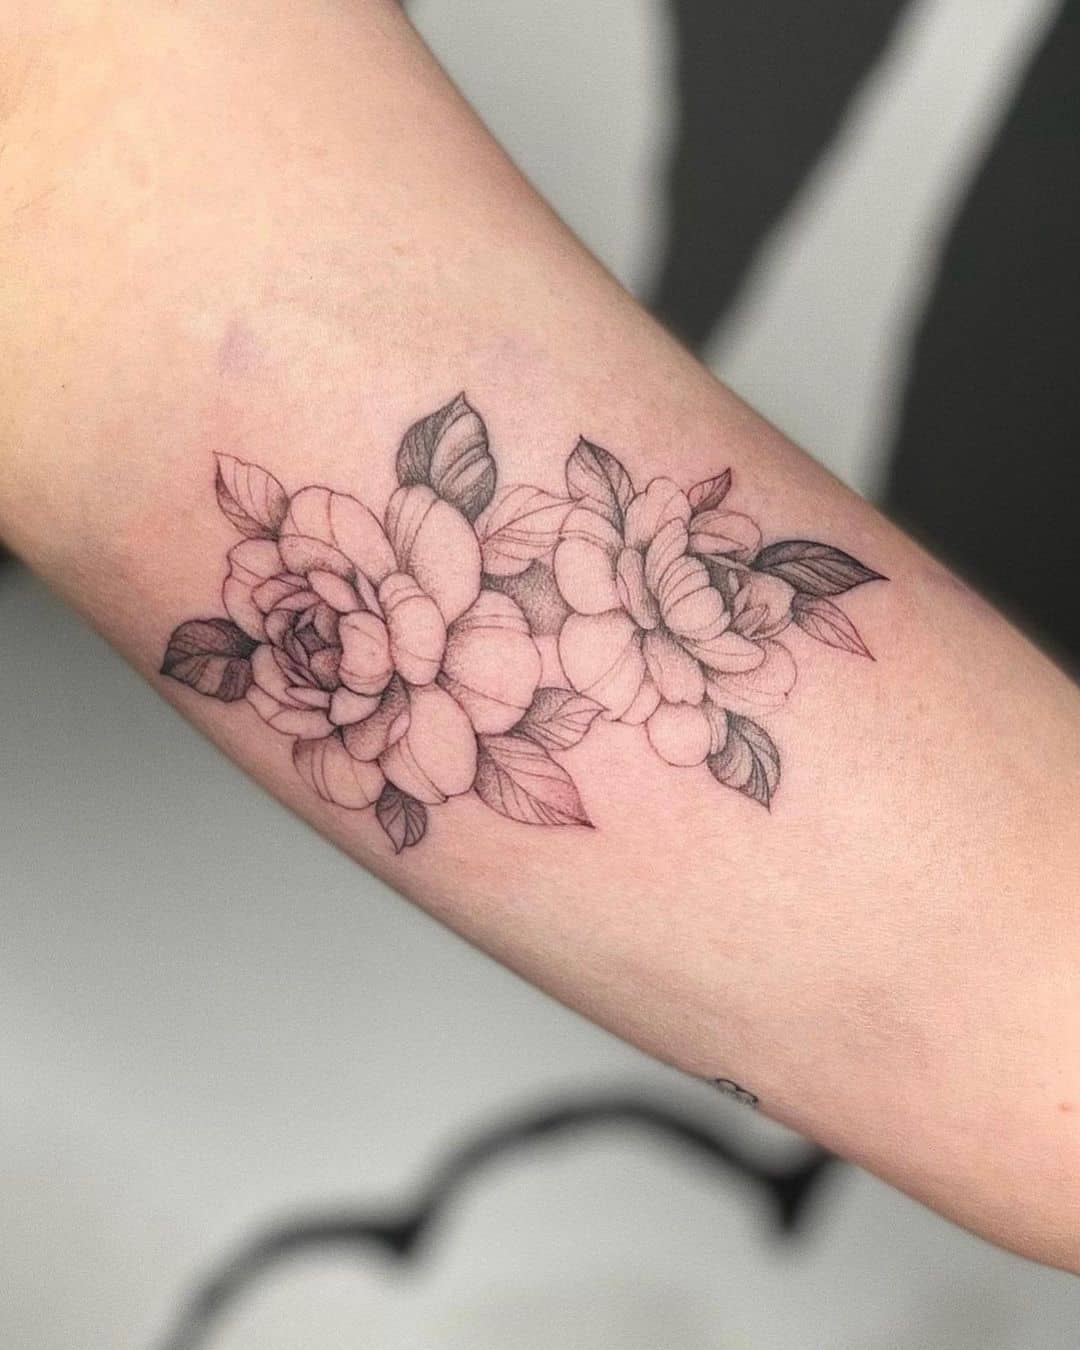 Alina  Fineline Tattoo Artist on Instagram Tiny single needle Tattoo  from a while ago      minitattoo wi  Single needle tattoo Tattoo  artists Tattoos